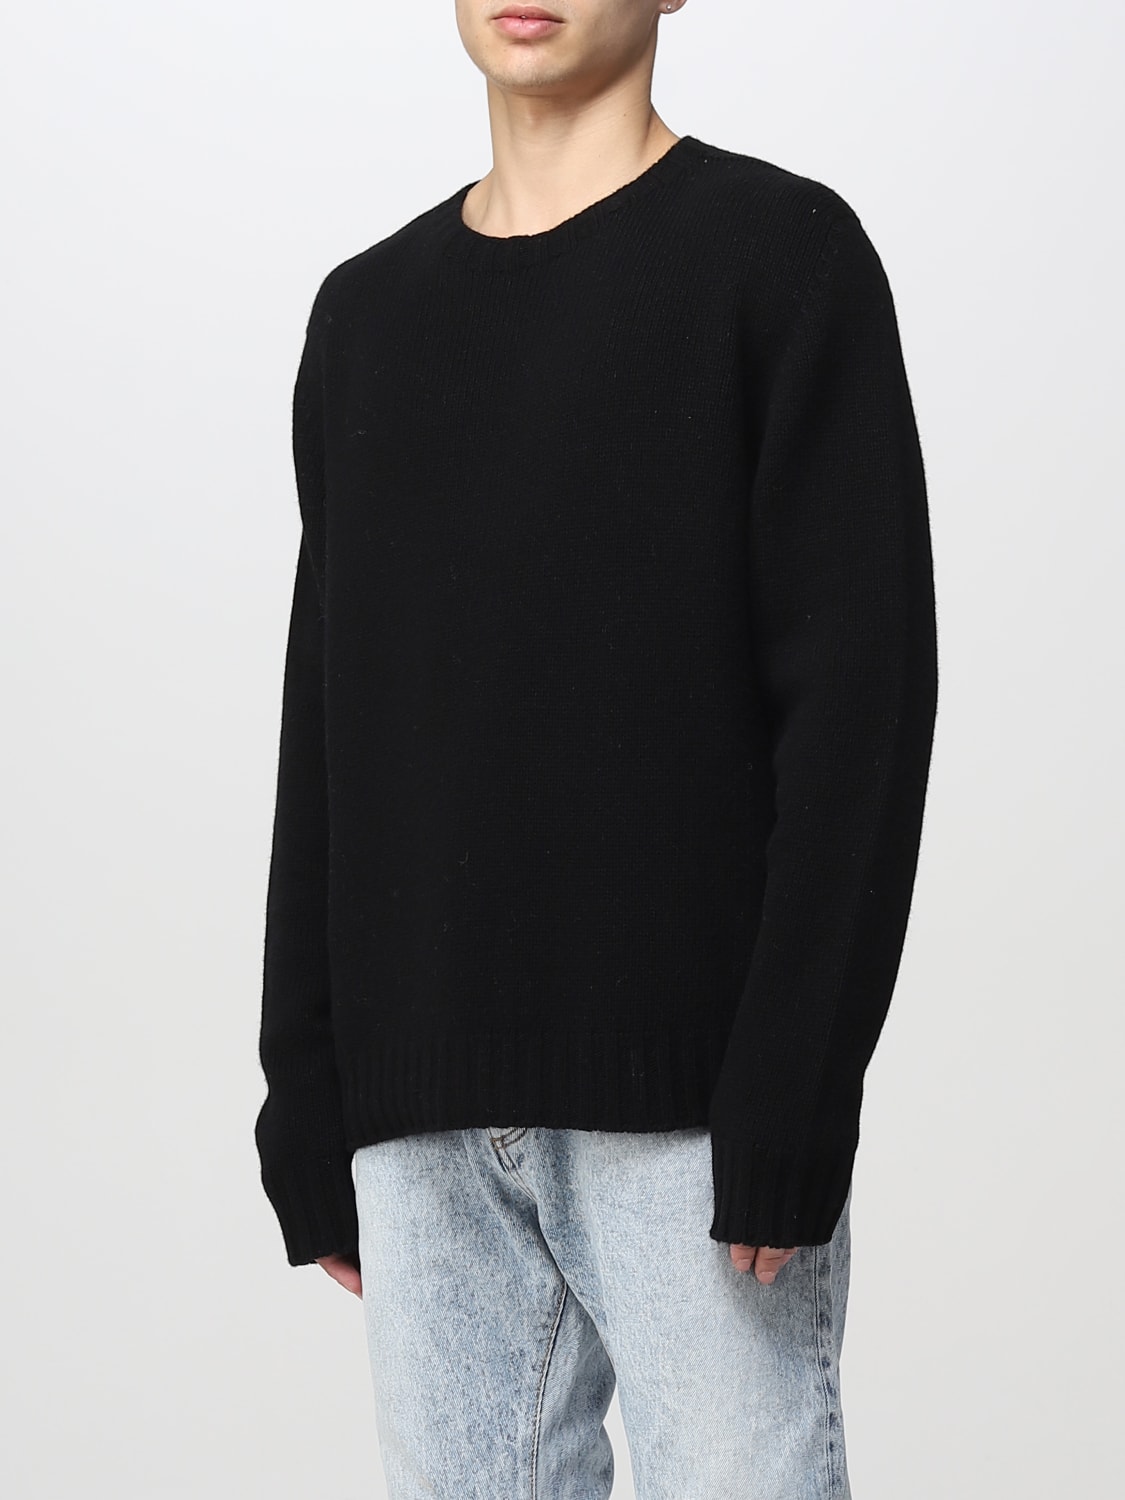 TURTLENECK SIDE-OPEN SWEATER in black - Palm Angels® Official